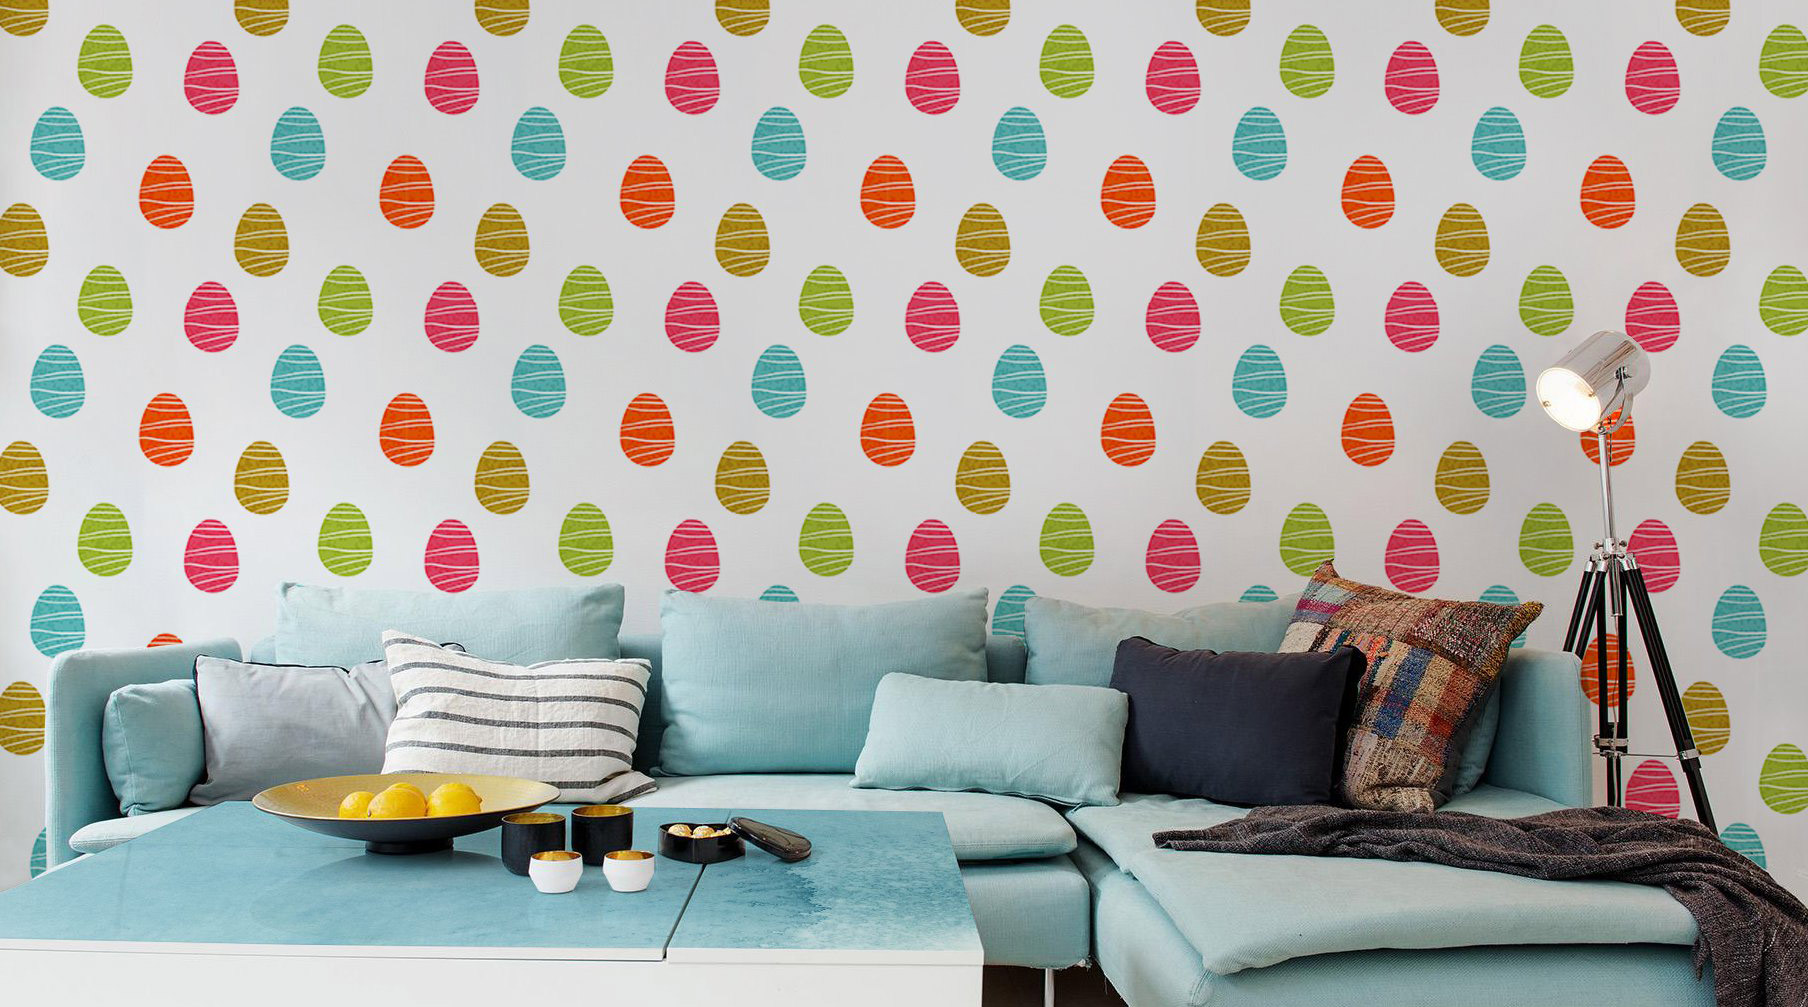 Easter full of color • Living room - Contemporary - Textures and patterns - Wall Murals - Stickers